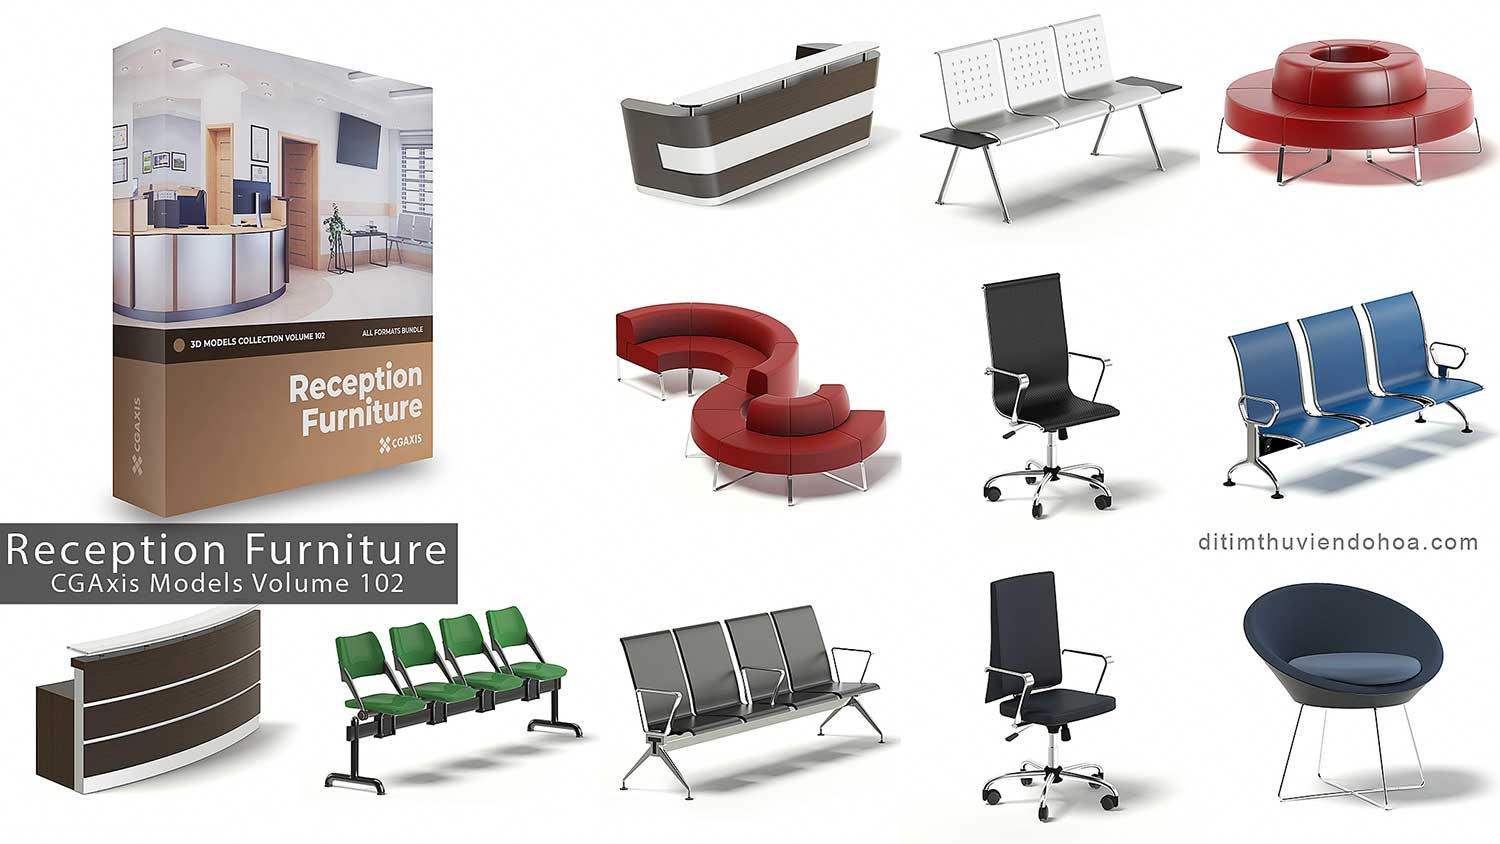 CGAxis Models Volume 102-Reception Furniture